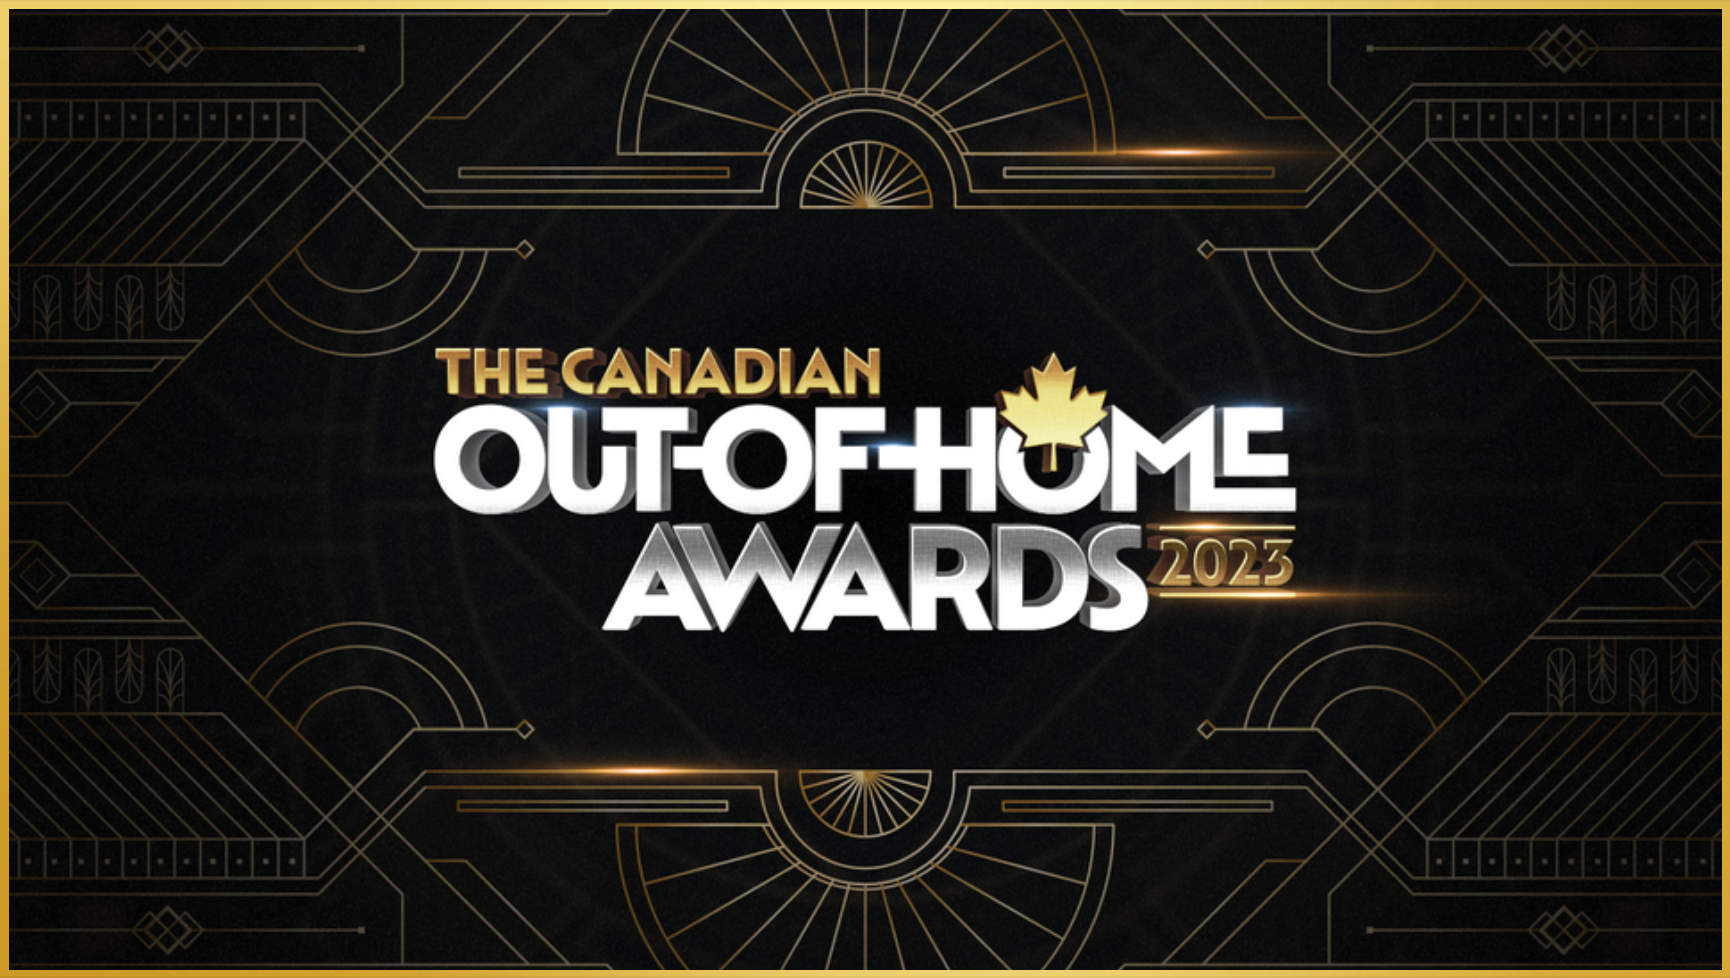 The Canadian Out of home Awards